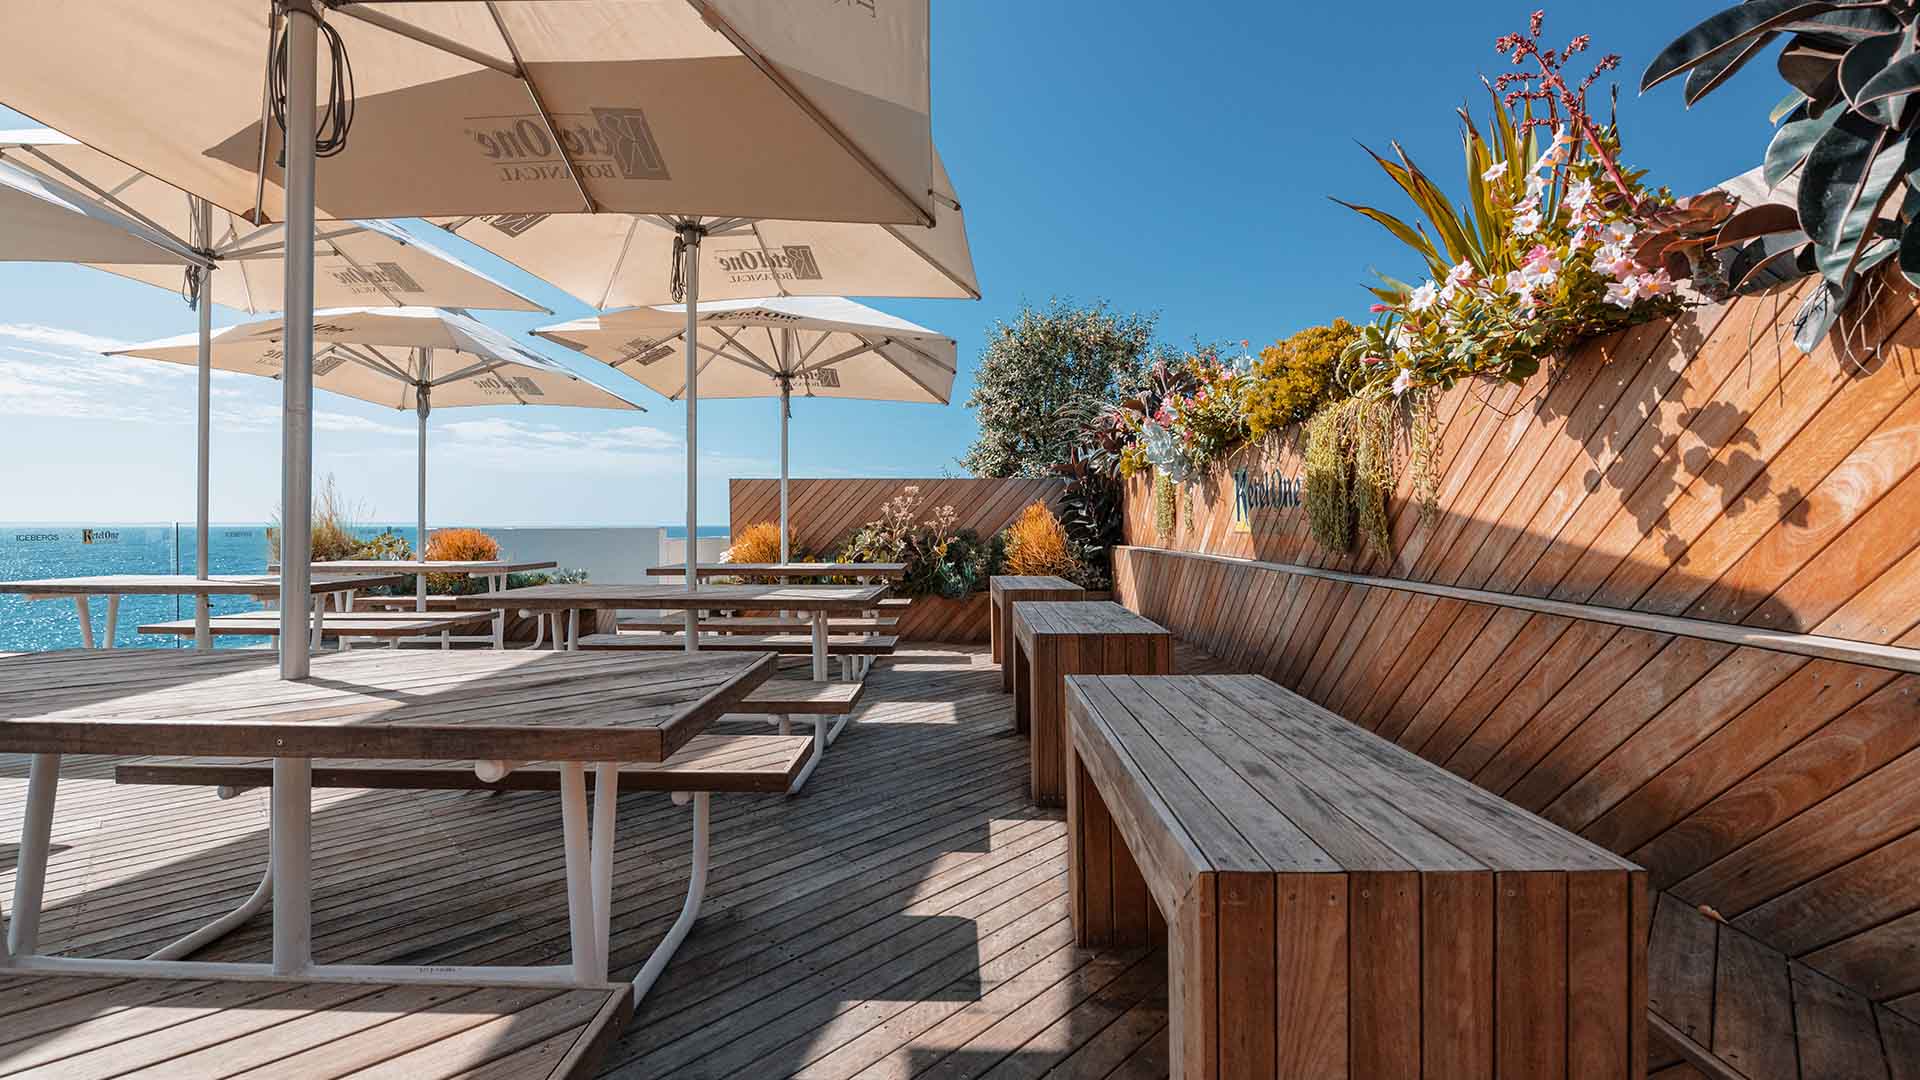 The Icebergs Terrace Has Transformed Into a Lush Pop-Up Bar Overlooking Bondi Beach for Another Summer